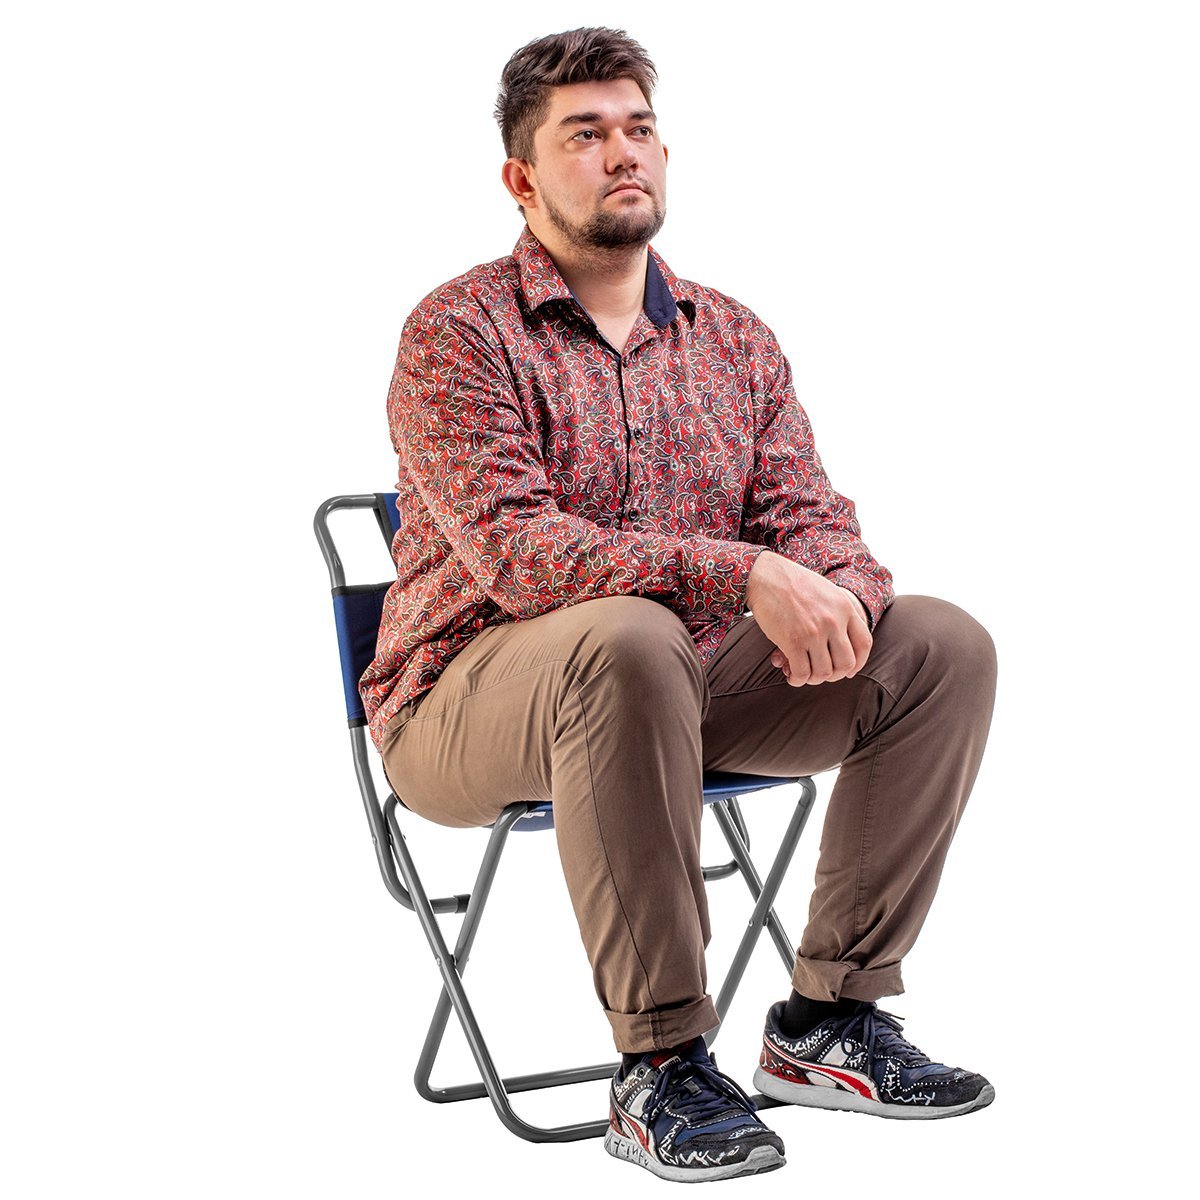 Man wearing a beard, shirt, trousers and snickers sitting on the folding camping chair